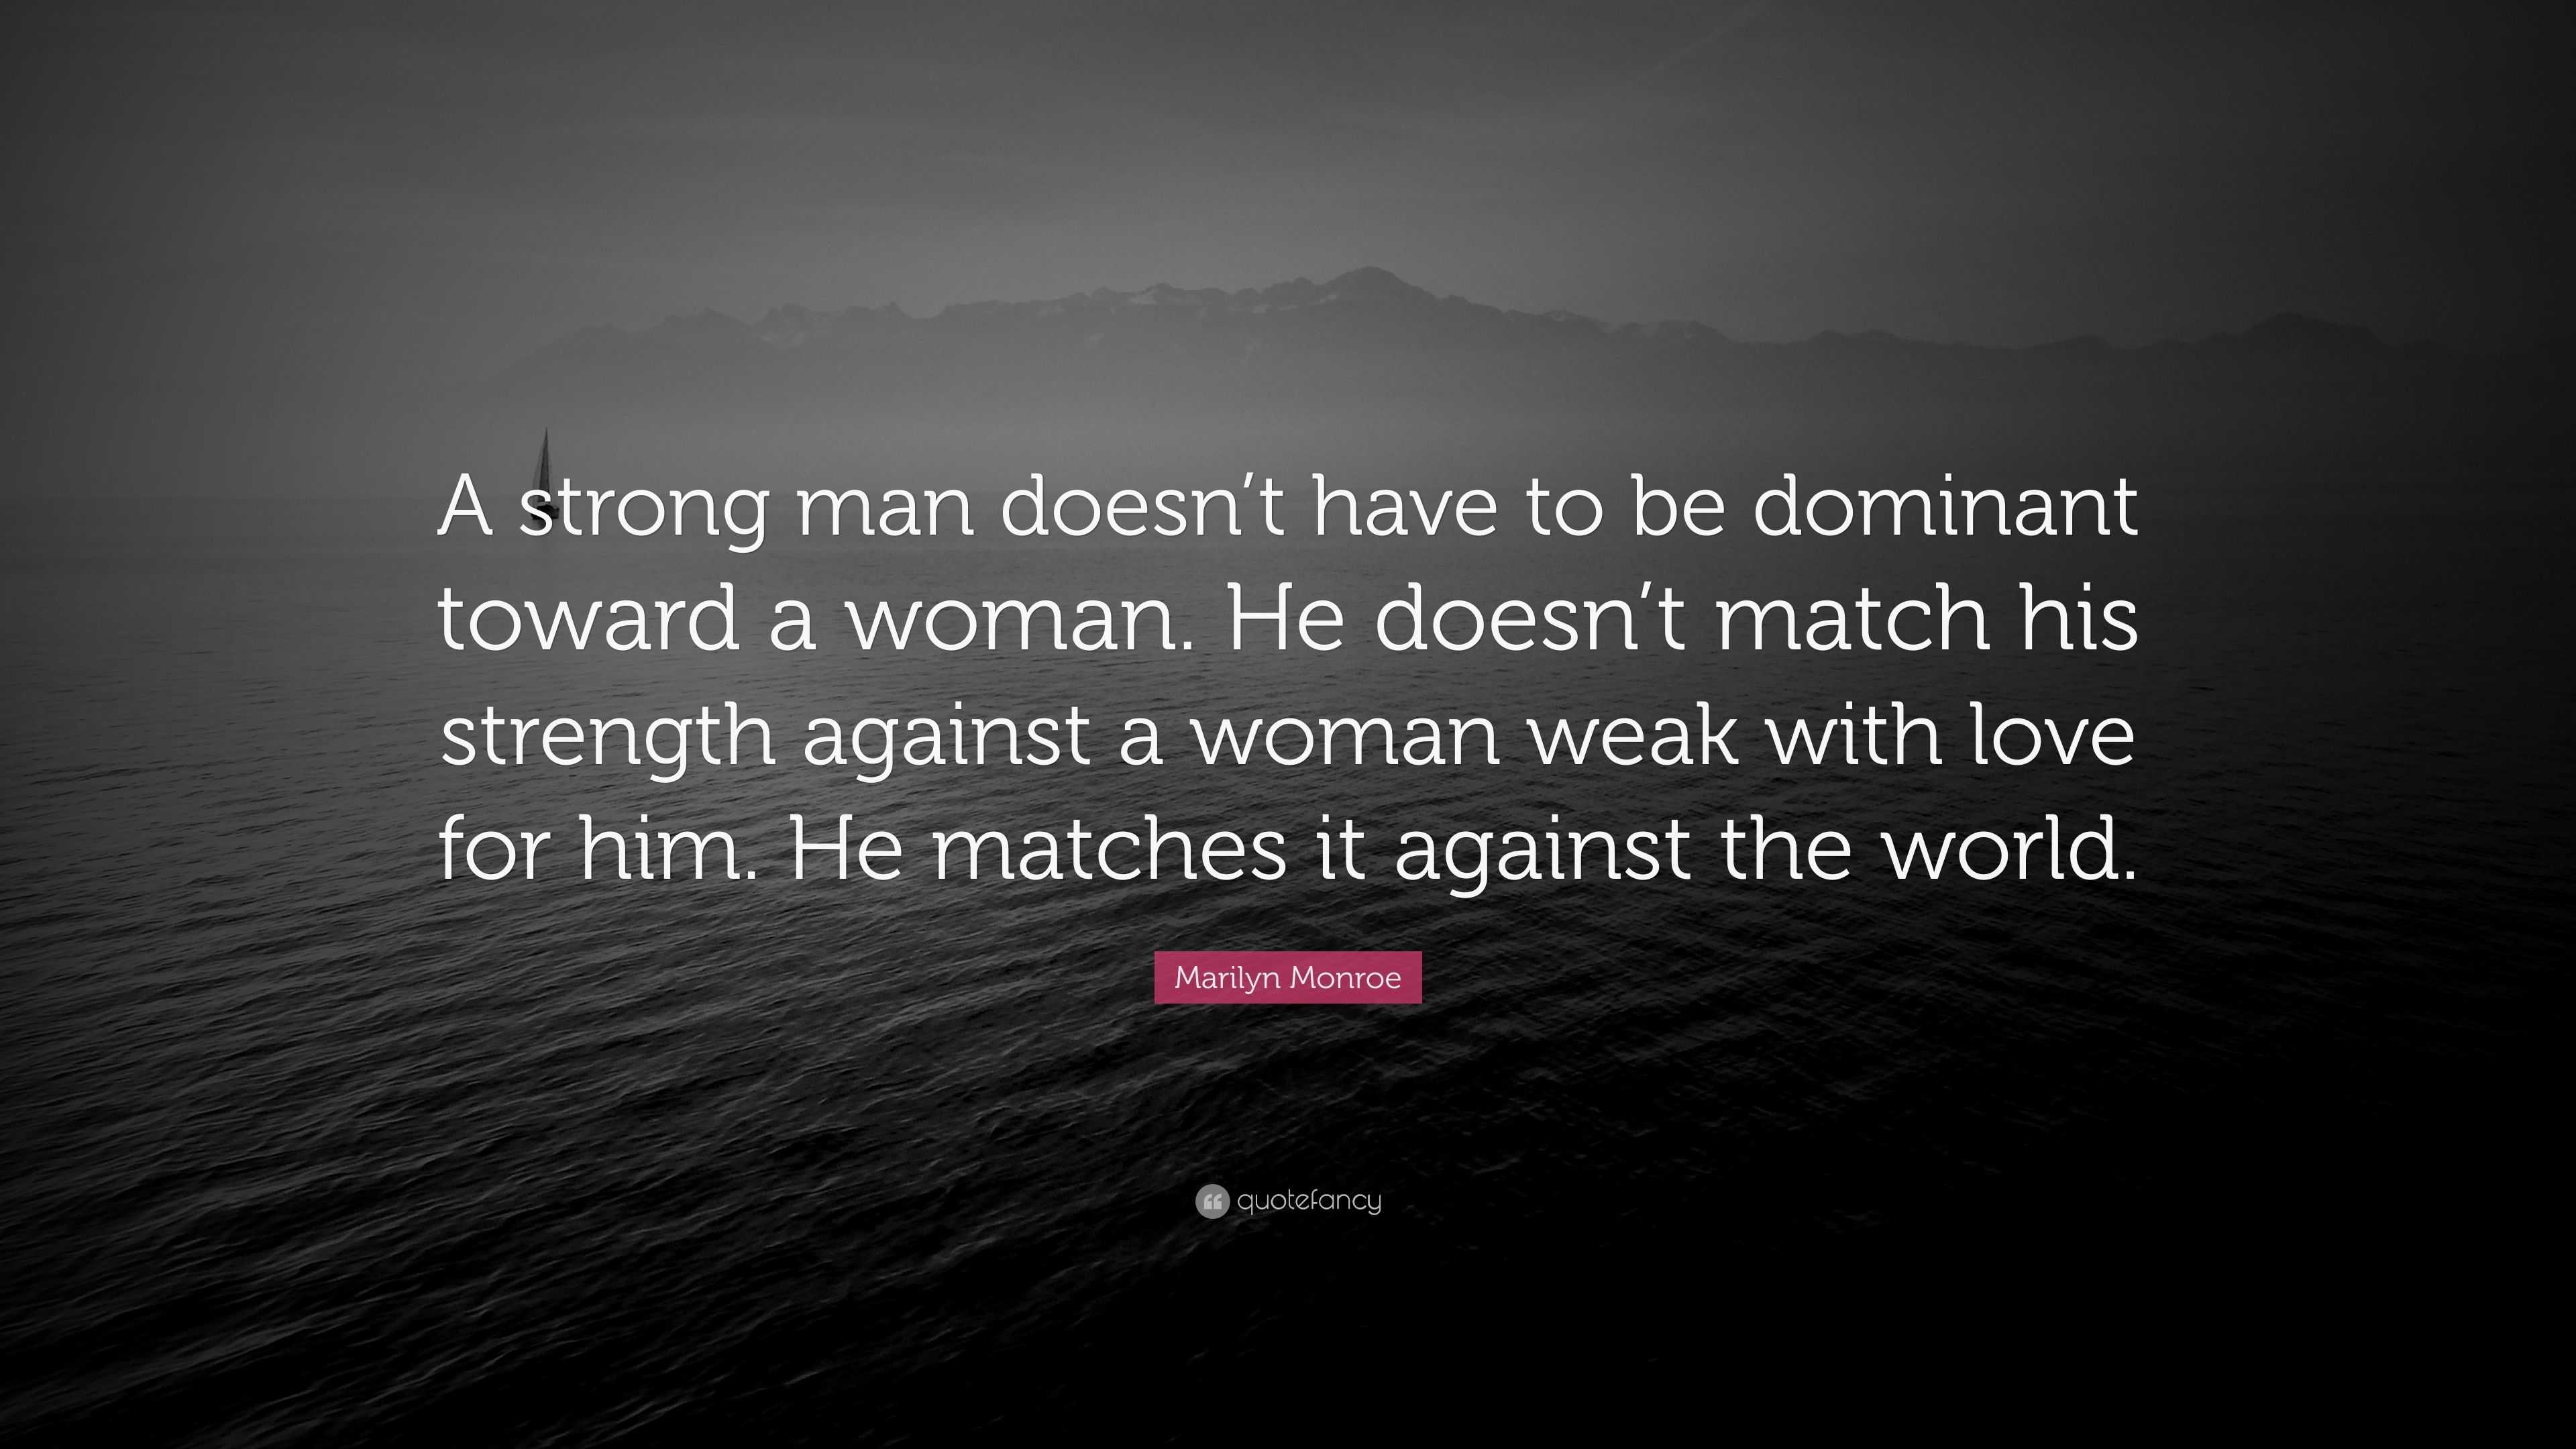 Marilyn Monroe Quote “A strong man doesn t have to be dominant toward